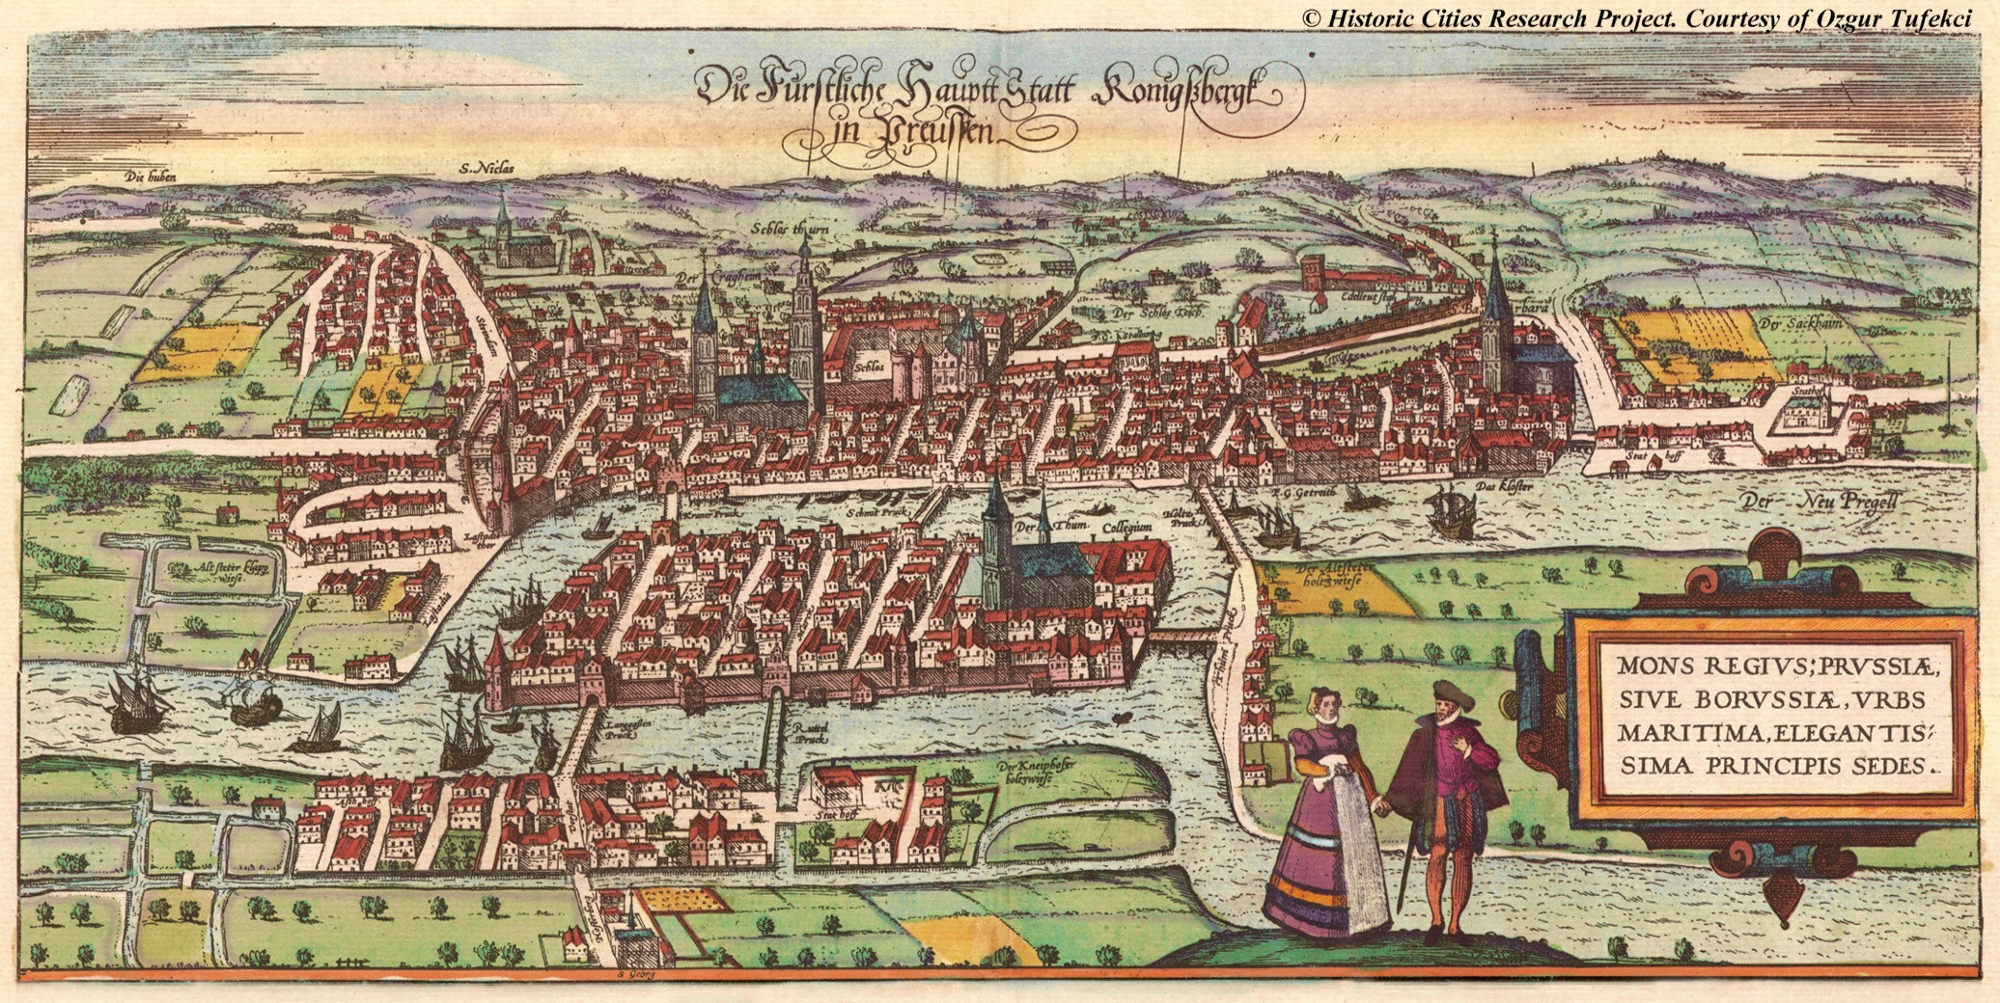 The Prussian city of K&ouml;nigsberg circa 1600 from *Civitates Orbis Terrarum*, Vol.III (credit: Historic Cities Research Project)